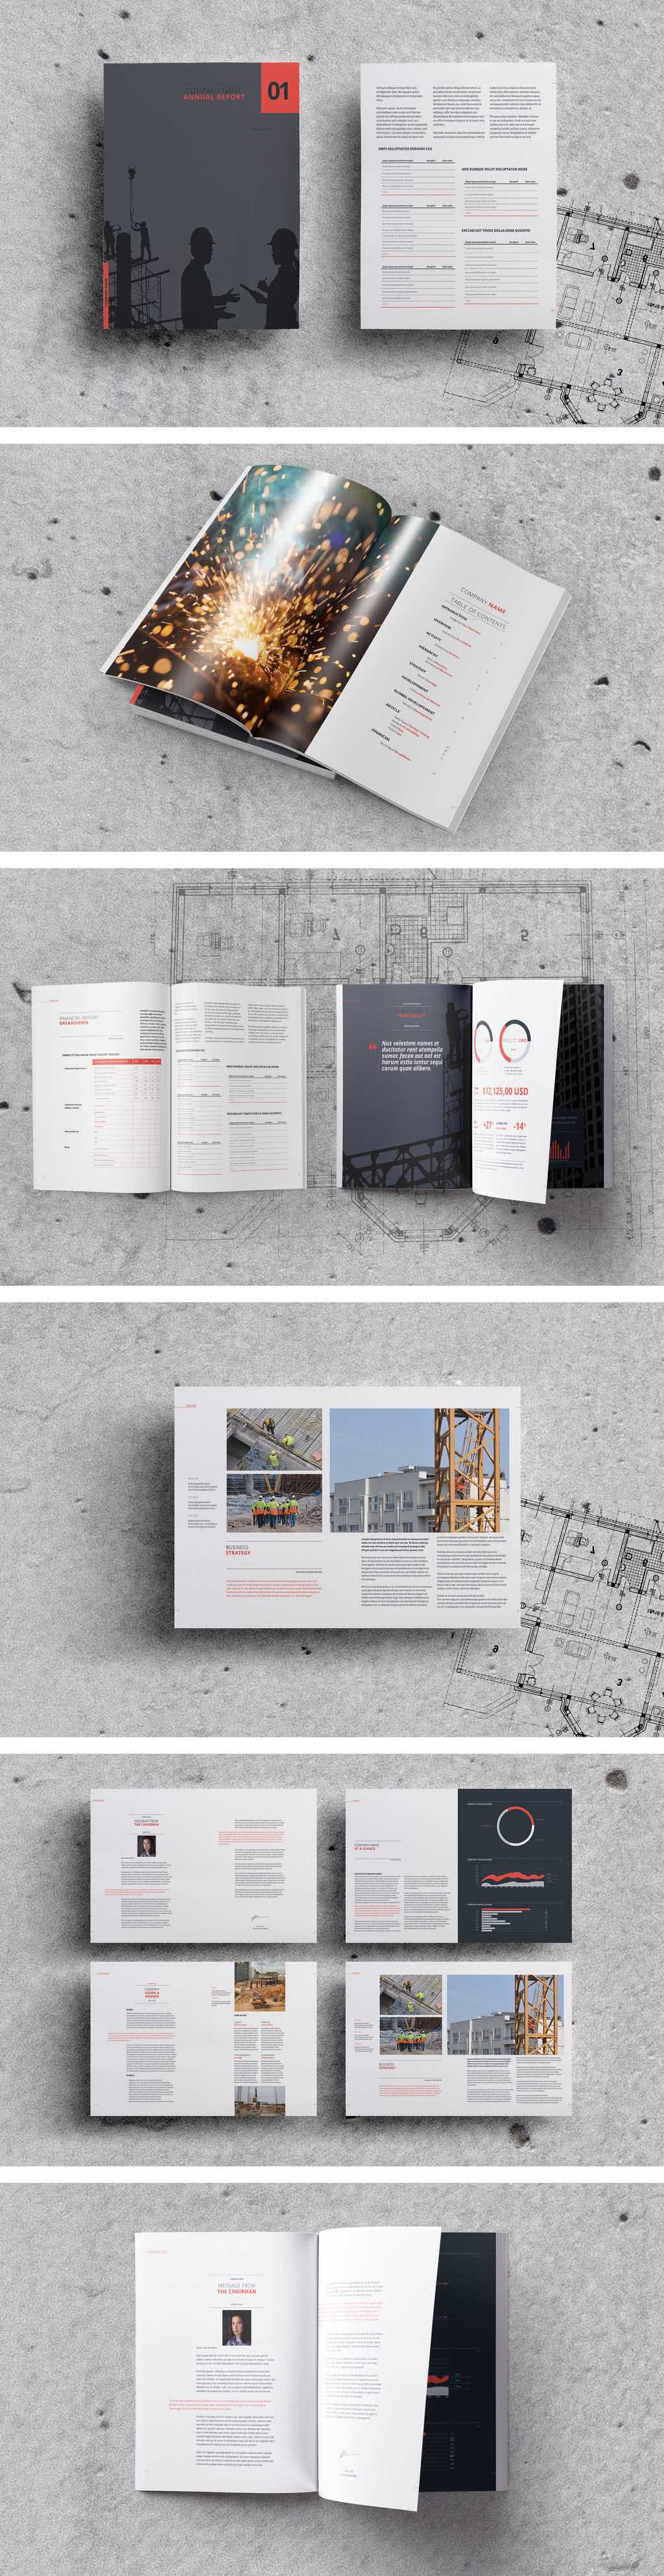 75 Fresh Indesign Templates And Where To Find More With Regard To Free Annual Report Template Indesign